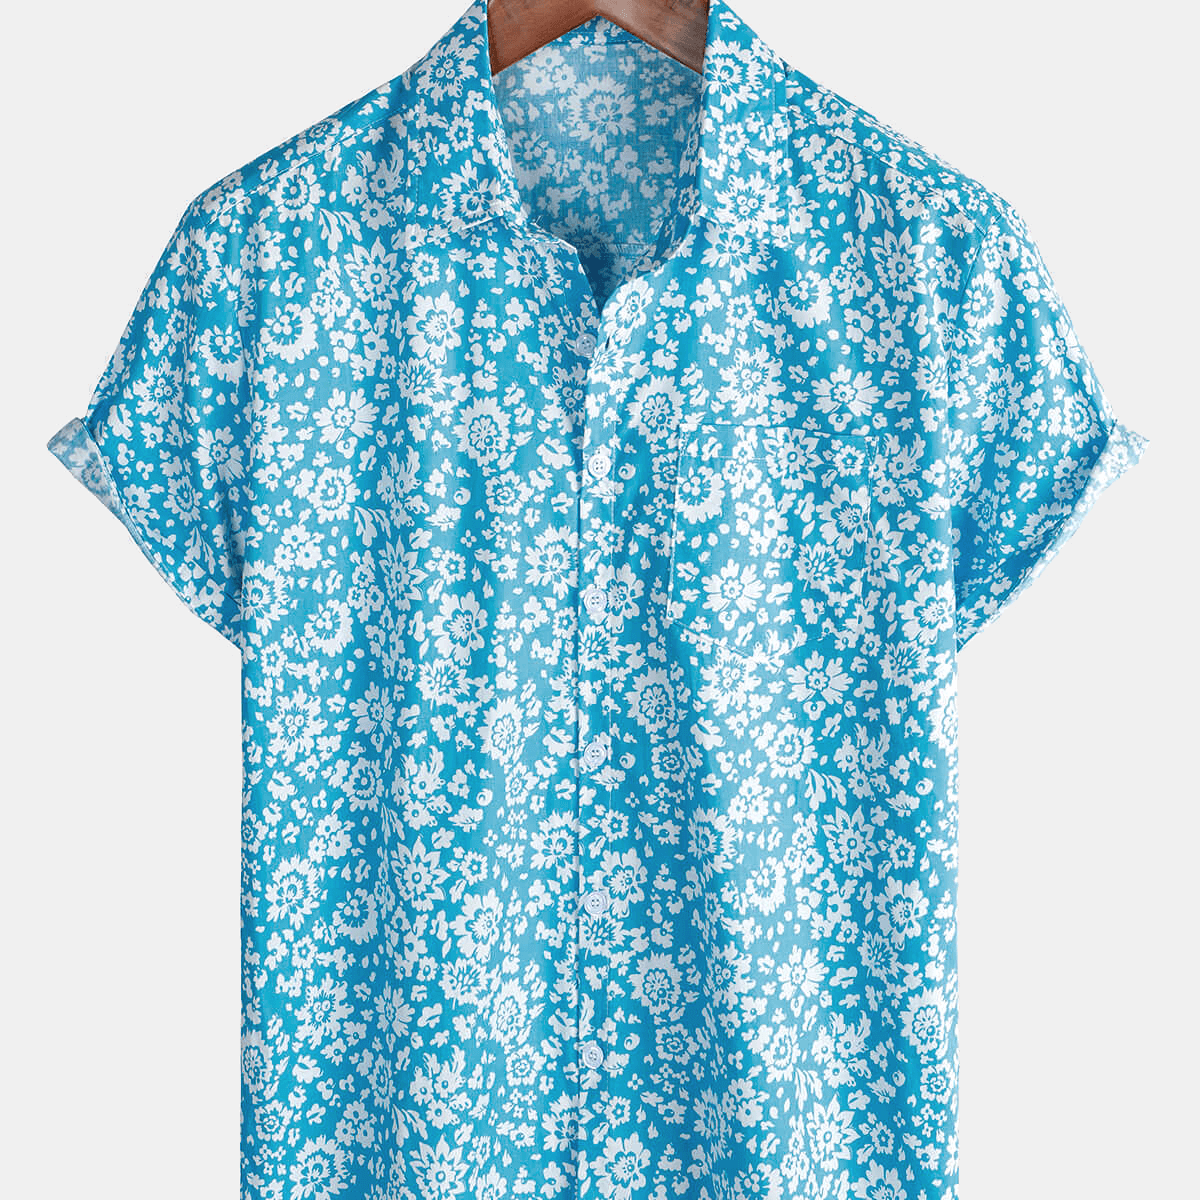 Men's Blue Holiday Summer Floral Button Up Casual Short Sleeve Shirt